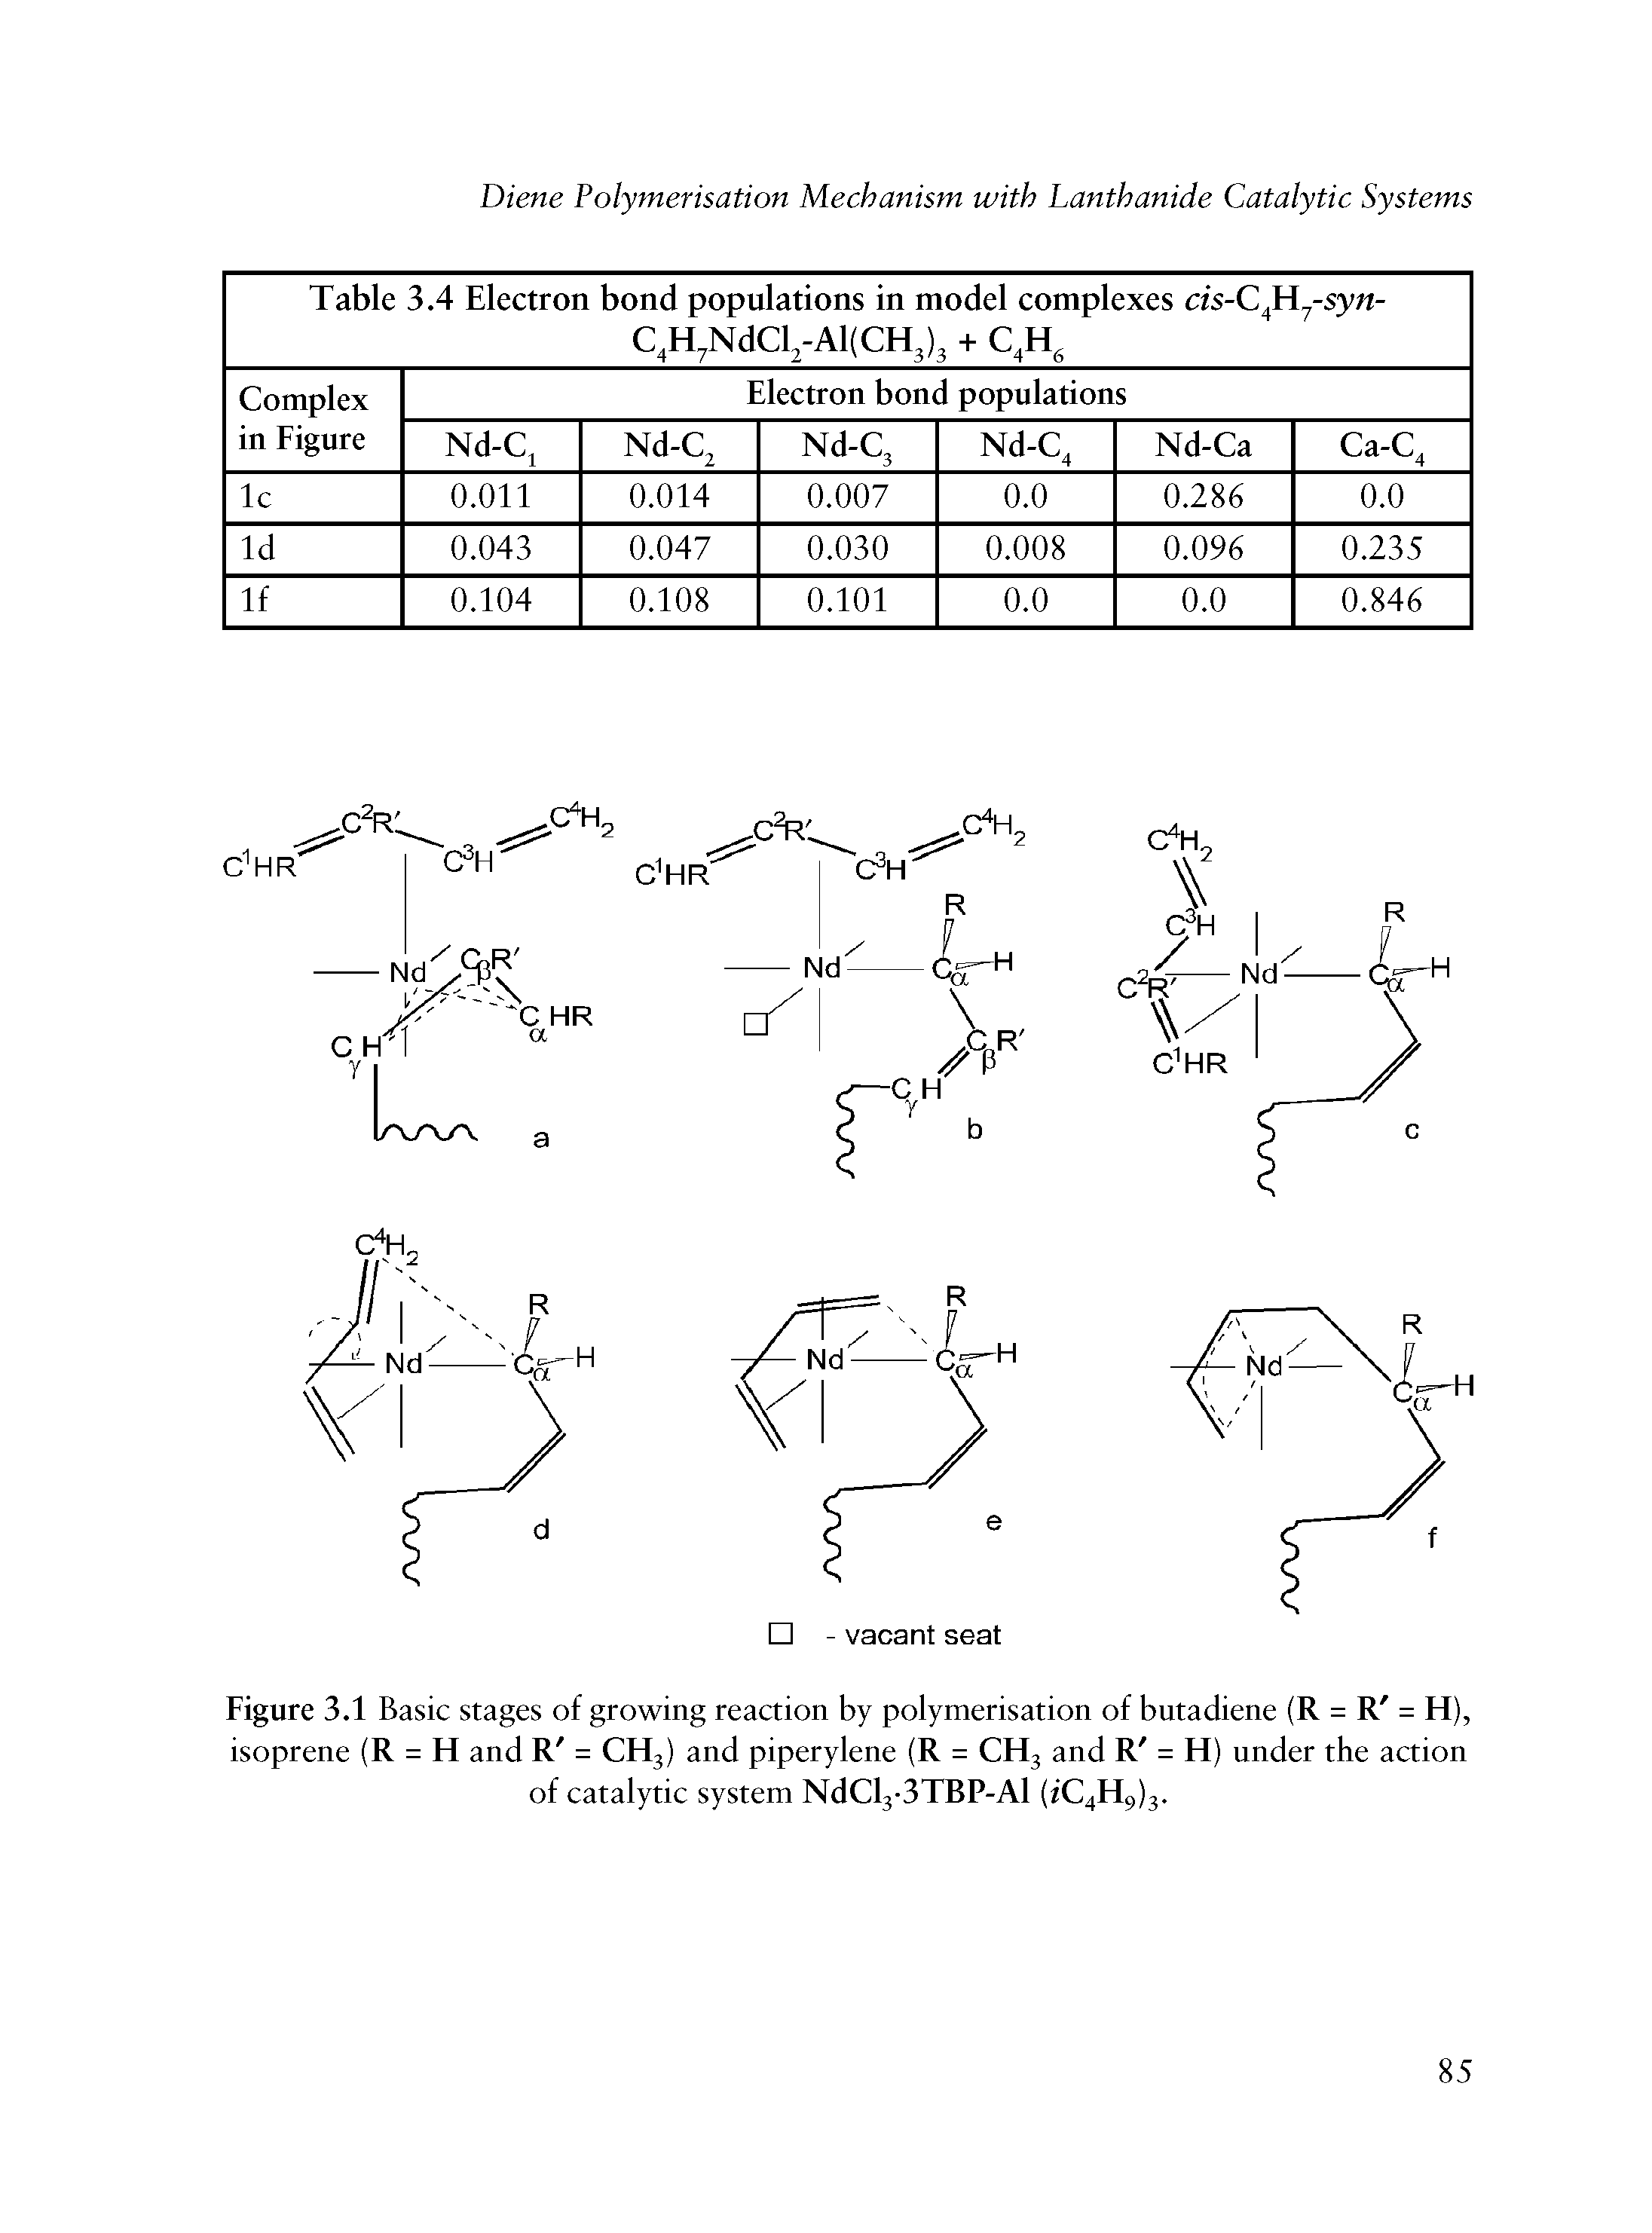 Figure 3.1 Basic stages of growing reaction by polymerisation of bntadiene (R = R = H), isoprene (R = H and R = CH3) and piperylene (R = CH3 and R = H) nnder the action of catalytic system NdCl3-3TBP-Al (iC4Hc,)3.